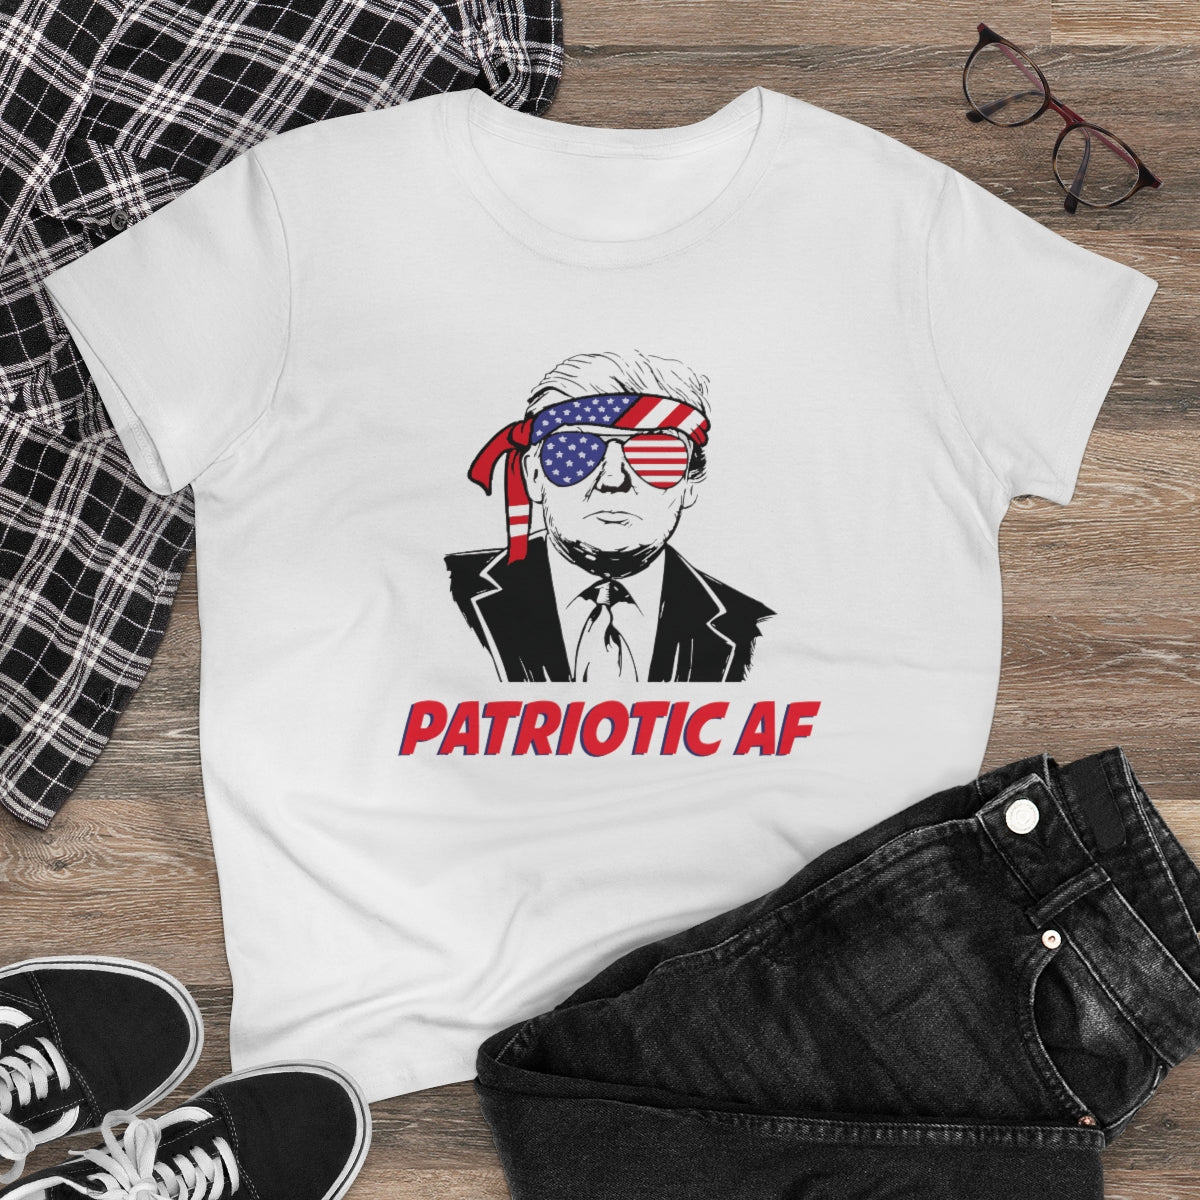 Patriotic AF with Trump | Women's Tee - Rise of The New Media